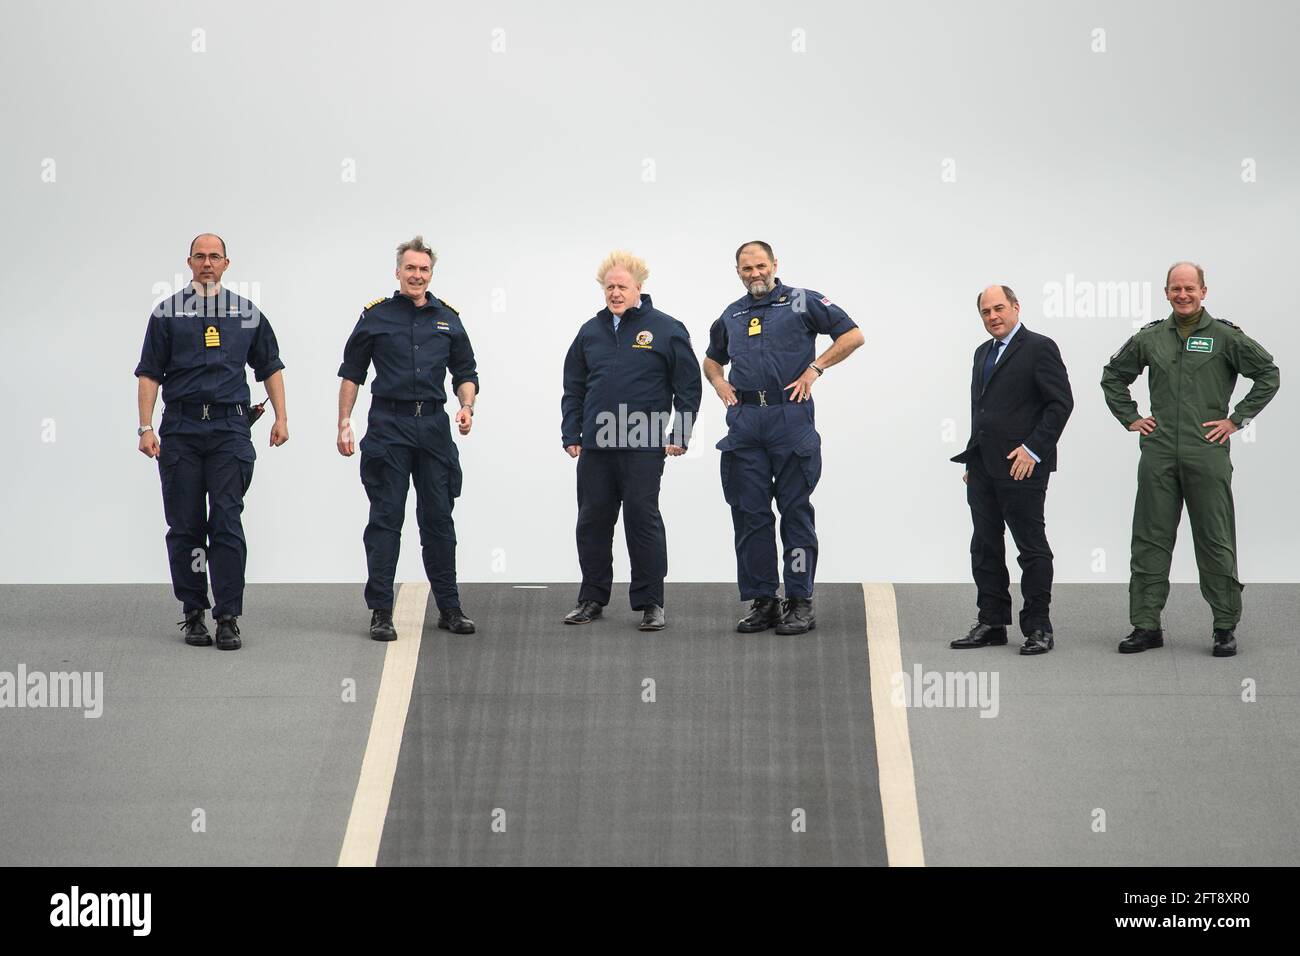 (Left to right) Captain Angus Essenhigh, First Sea Lord Admiral Tony Radakin, Prime Minister Boris Johnson, Commodore Steve Moorhouse, Defence Secretary Ben Wallace and and Air Chief Marshal Sir Mike Wigston face strong winds as they walk on the flight deck, during a visit aboard HMS Queen Elizabeth in Portsmouth ahead of its first operational deployment to the Far East. Picture date: Friday May 21, 2021. Stock Photo